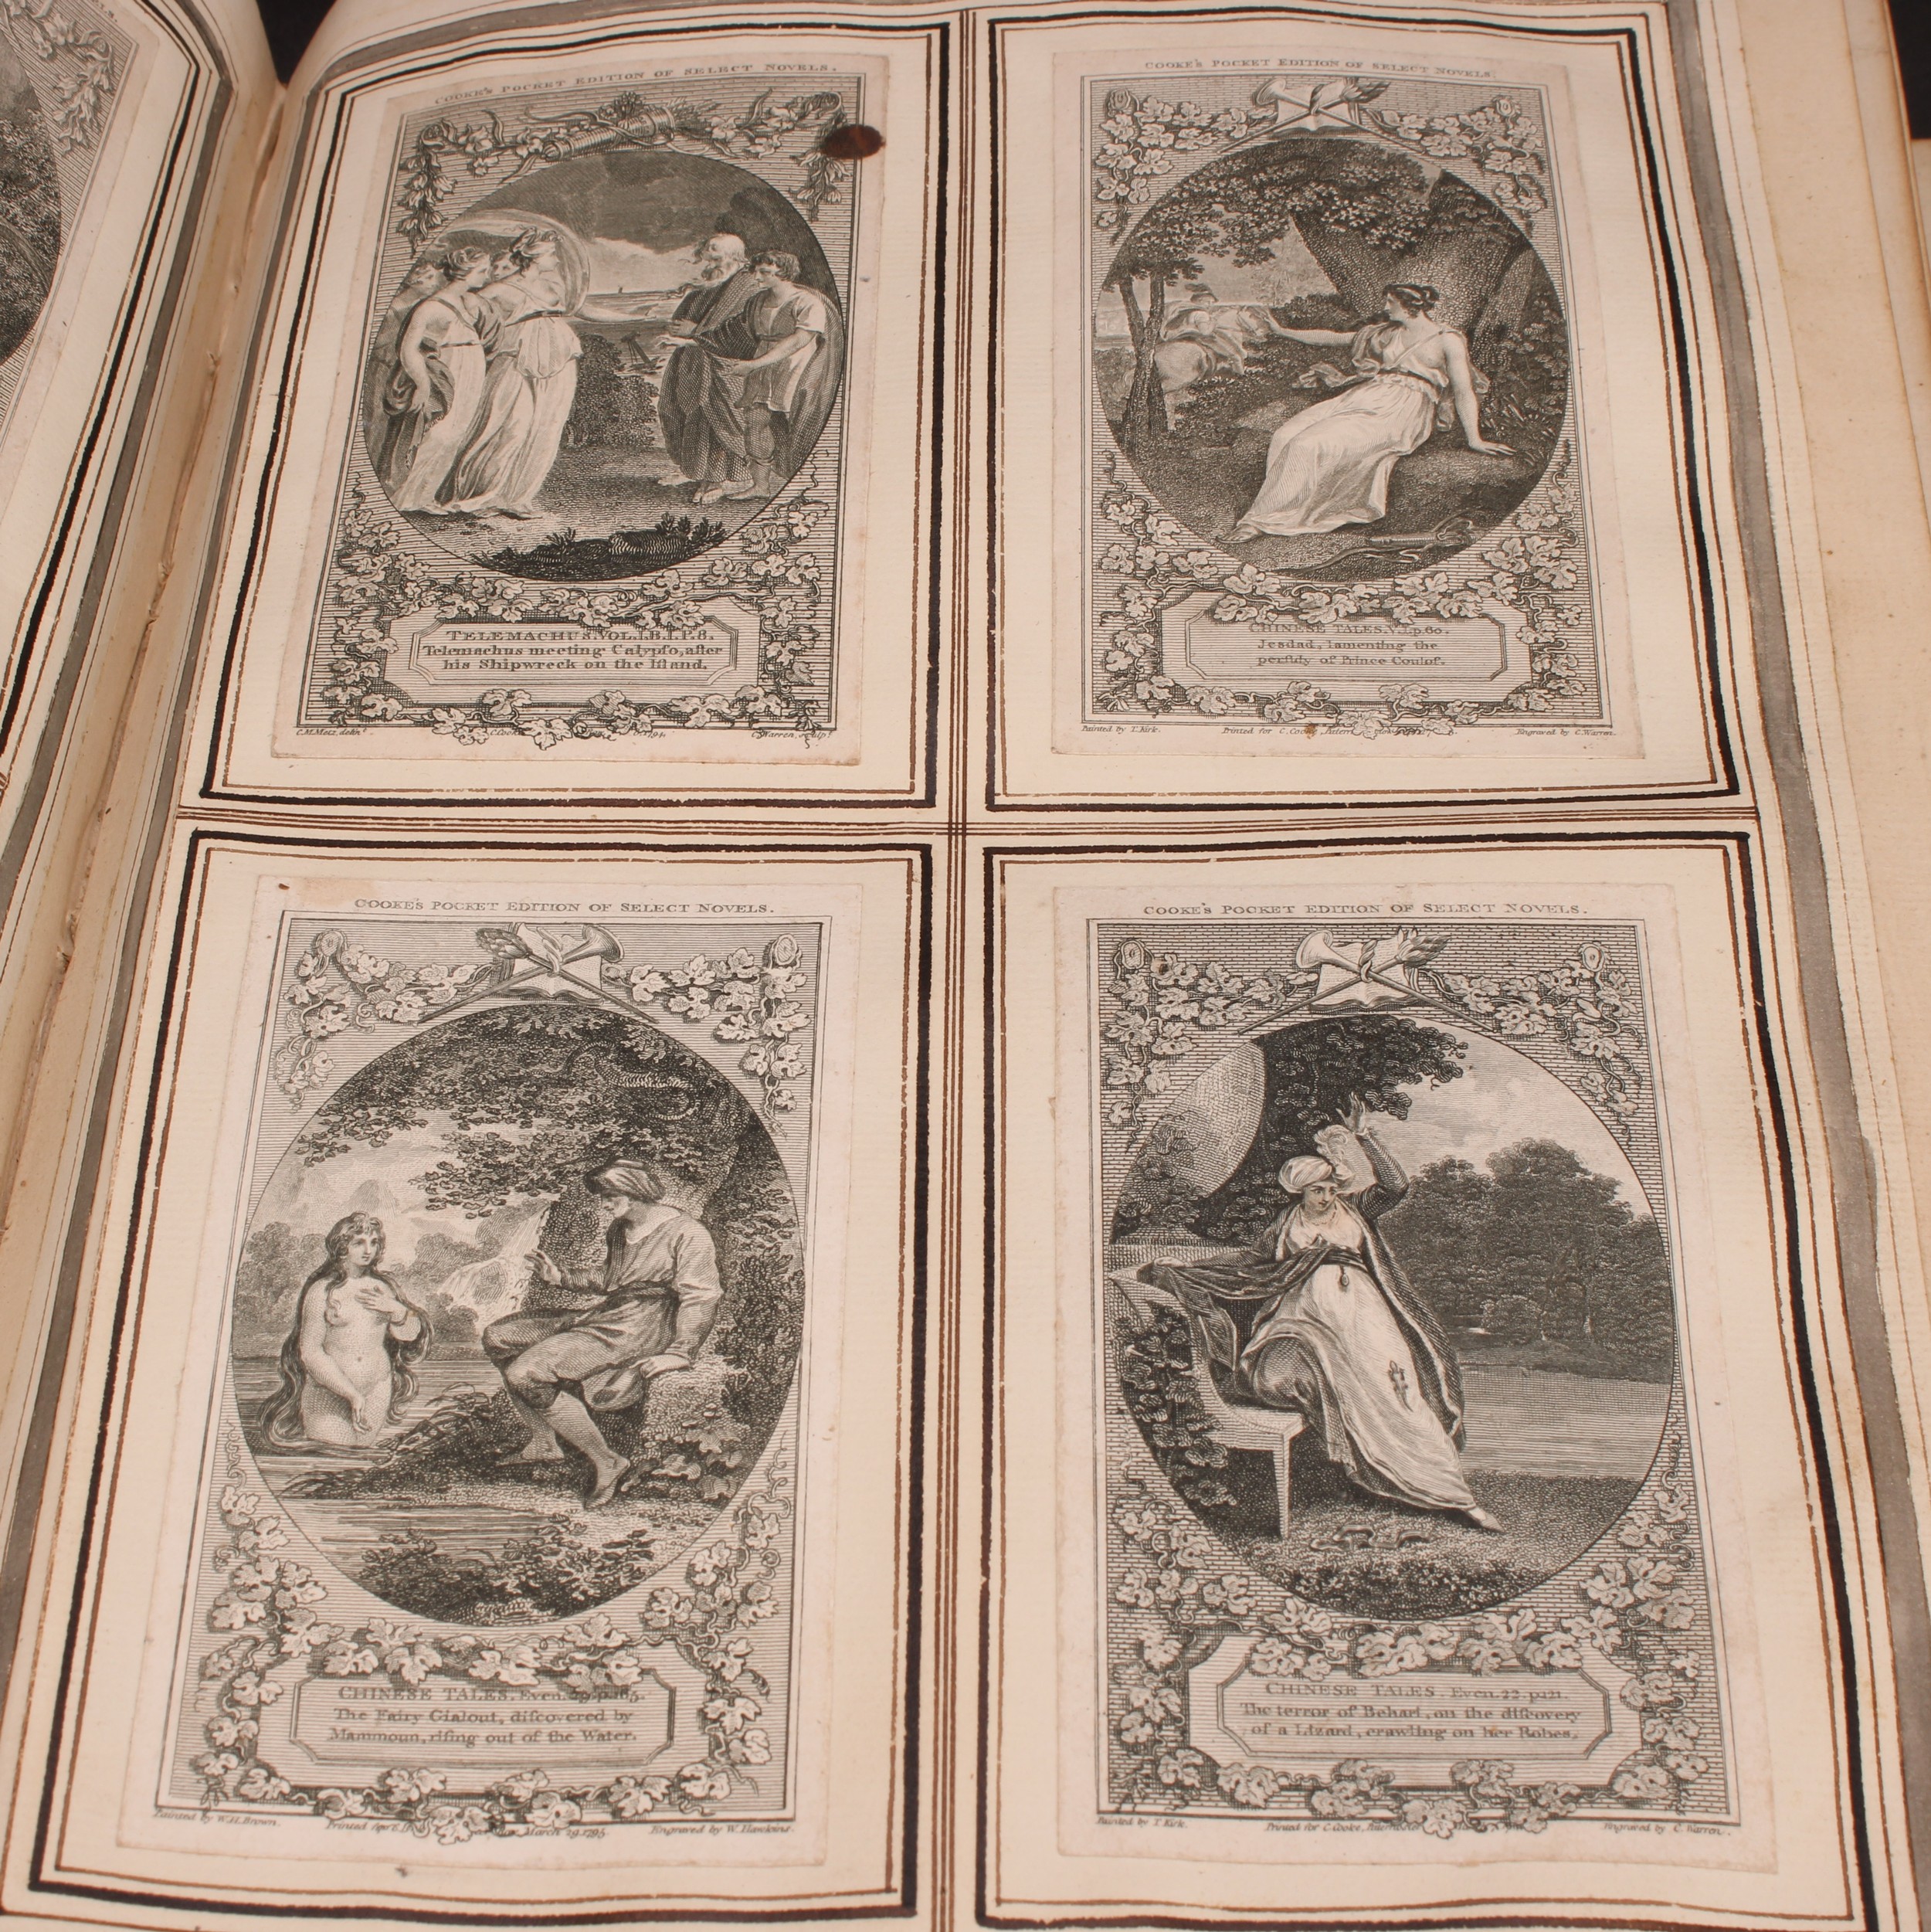 An album of 19th century engravings, hand-scrivened frontispiece inscribed 'A Collection of Prints - Image 5 of 6